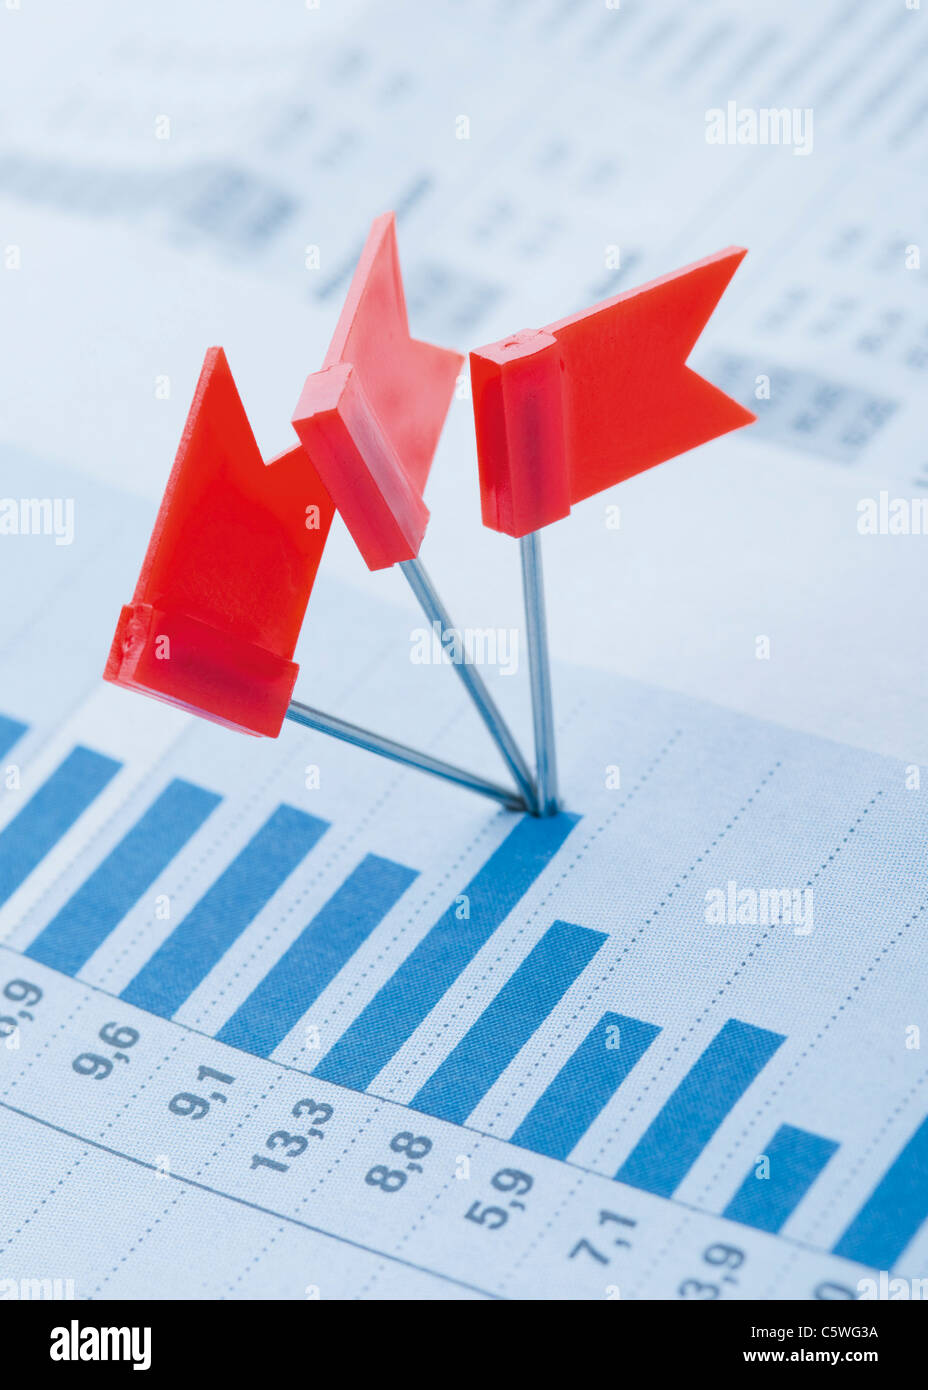 Red flags on bar chart, close up Stock Photo